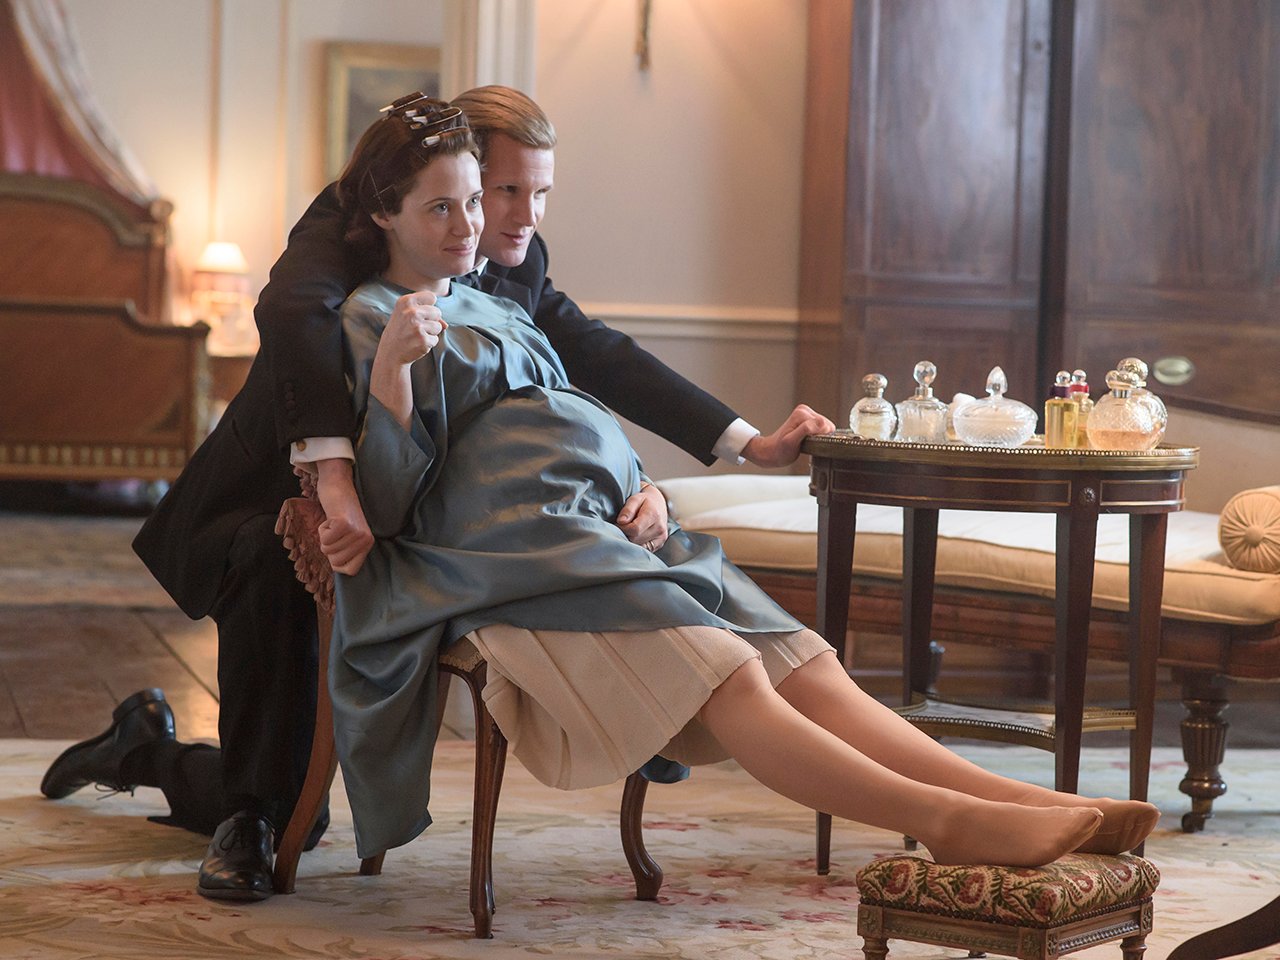 Production still from The Crown, where Philip and Elizabeth share an intimate moment. The Crown Season Two.